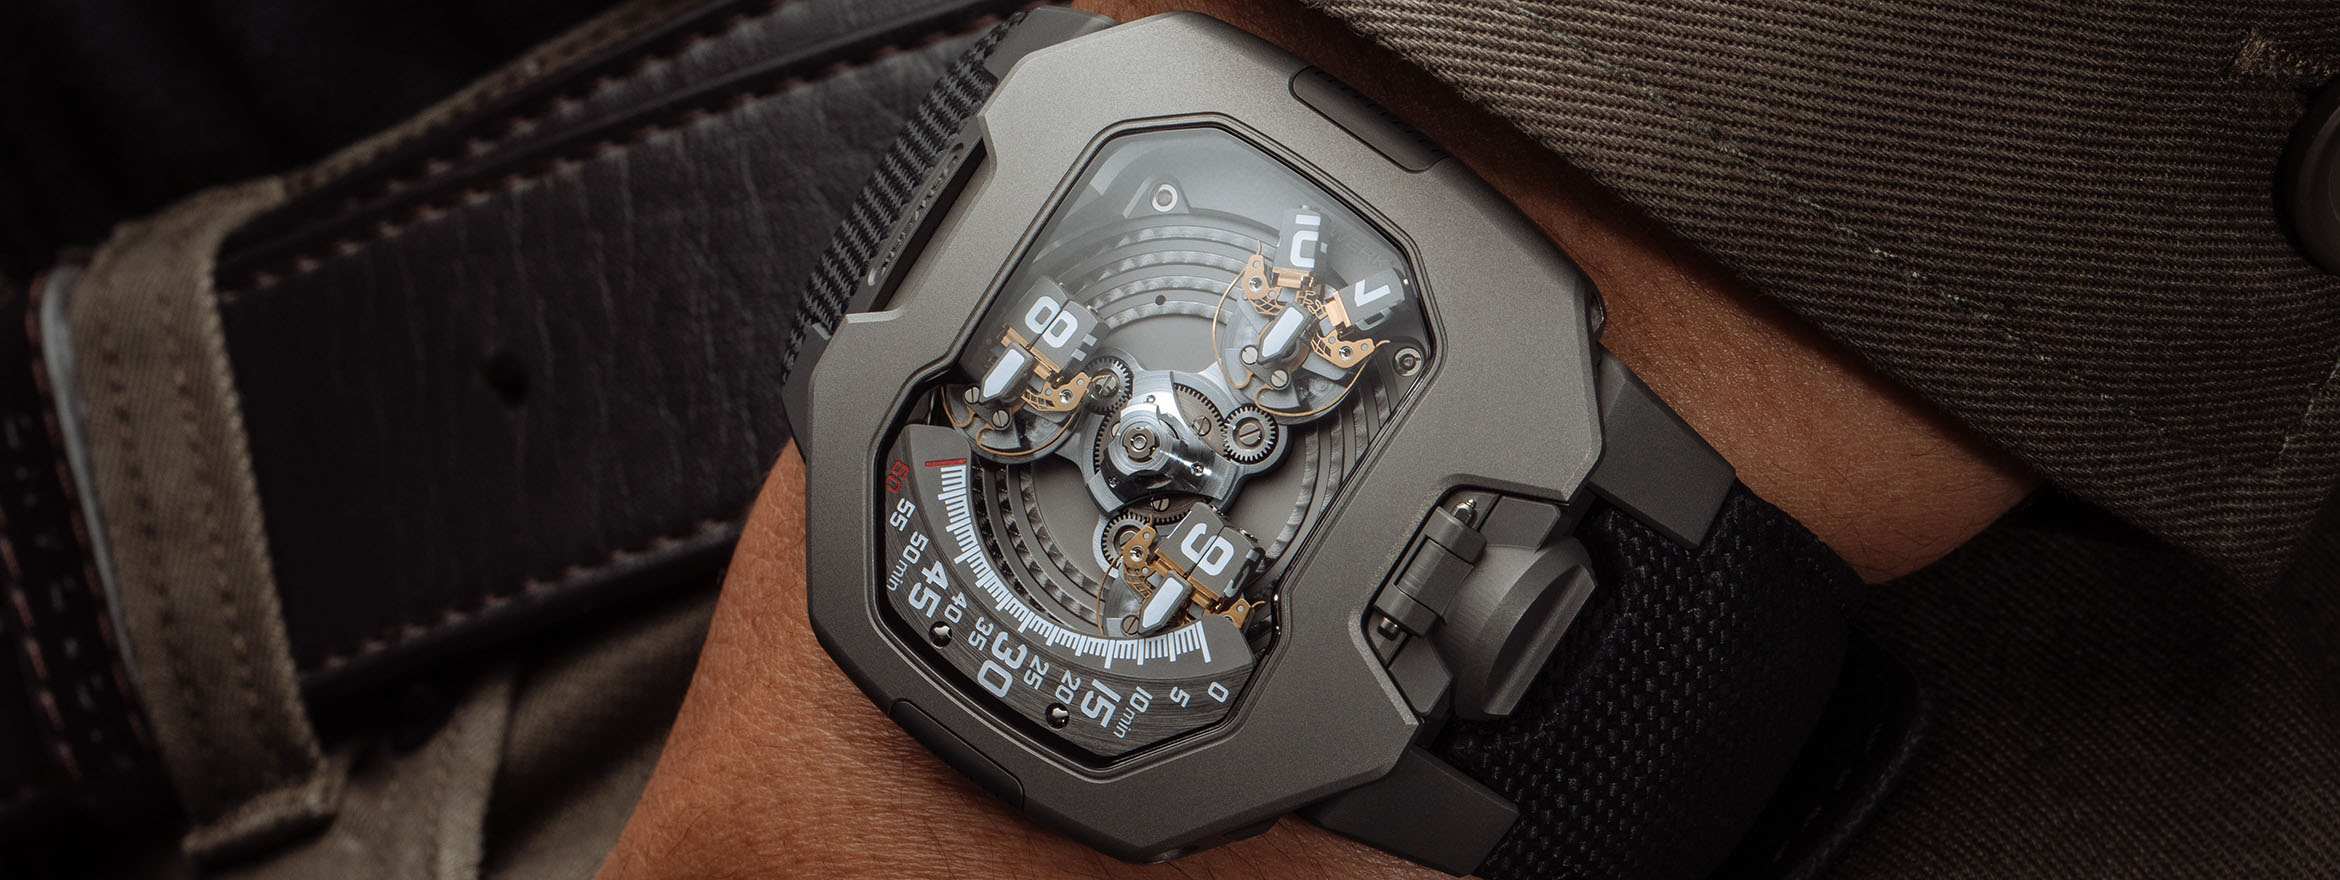 Live Long and Prosper: URWERK Launches the New UR-120 aka “Spock”